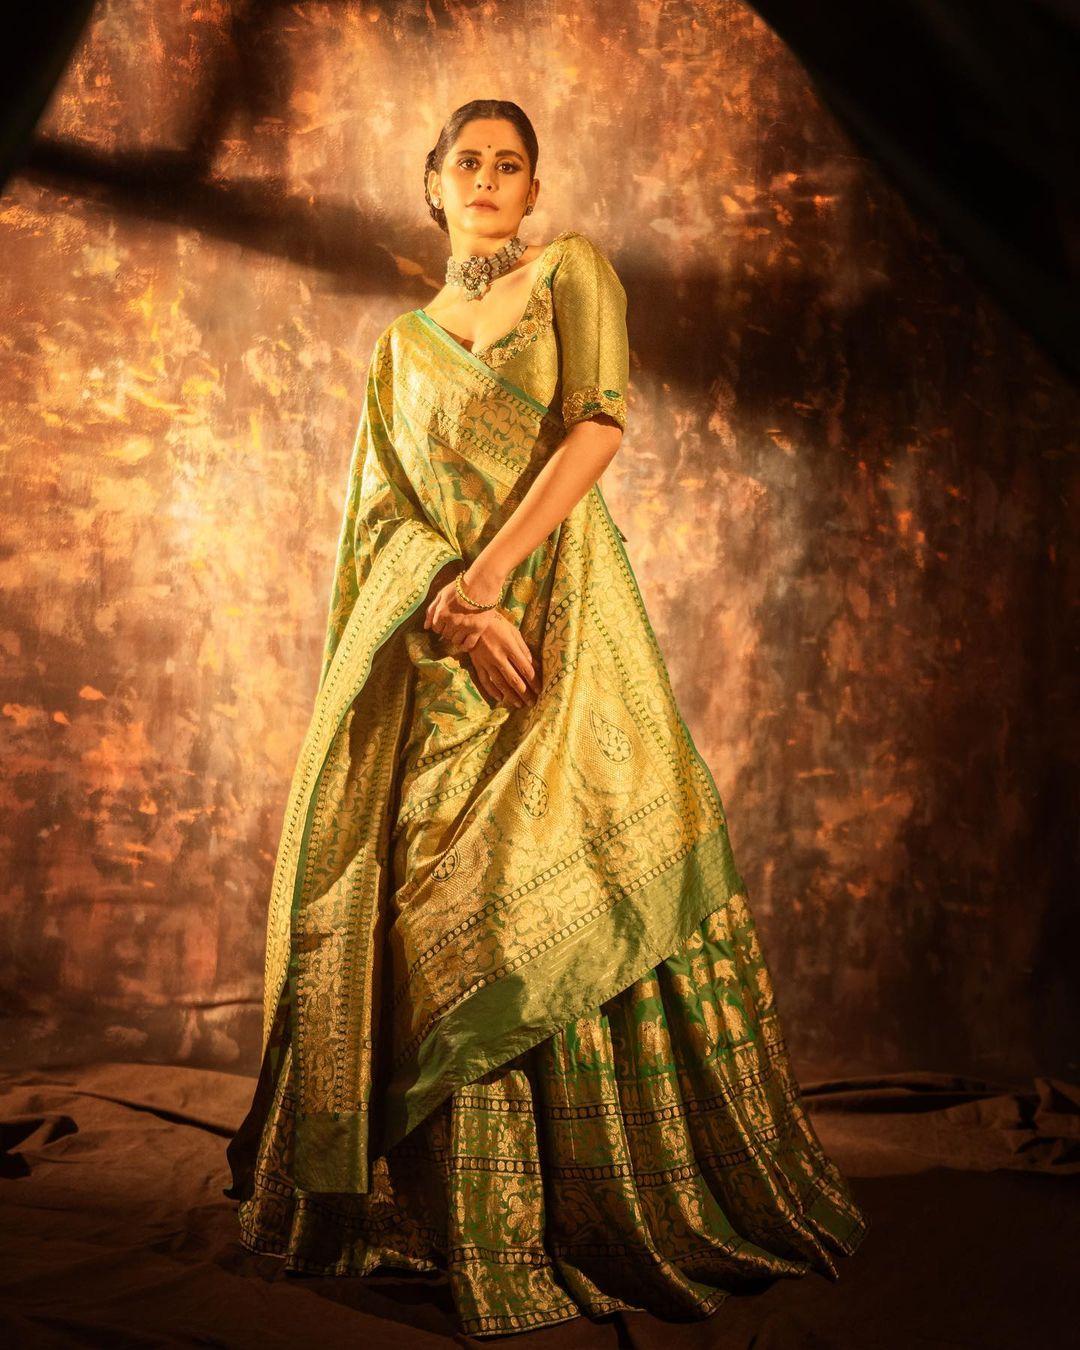 Sai's lehenga choices also hit the mark, exemplified by her appearance in a green and golden embroidered lehenga